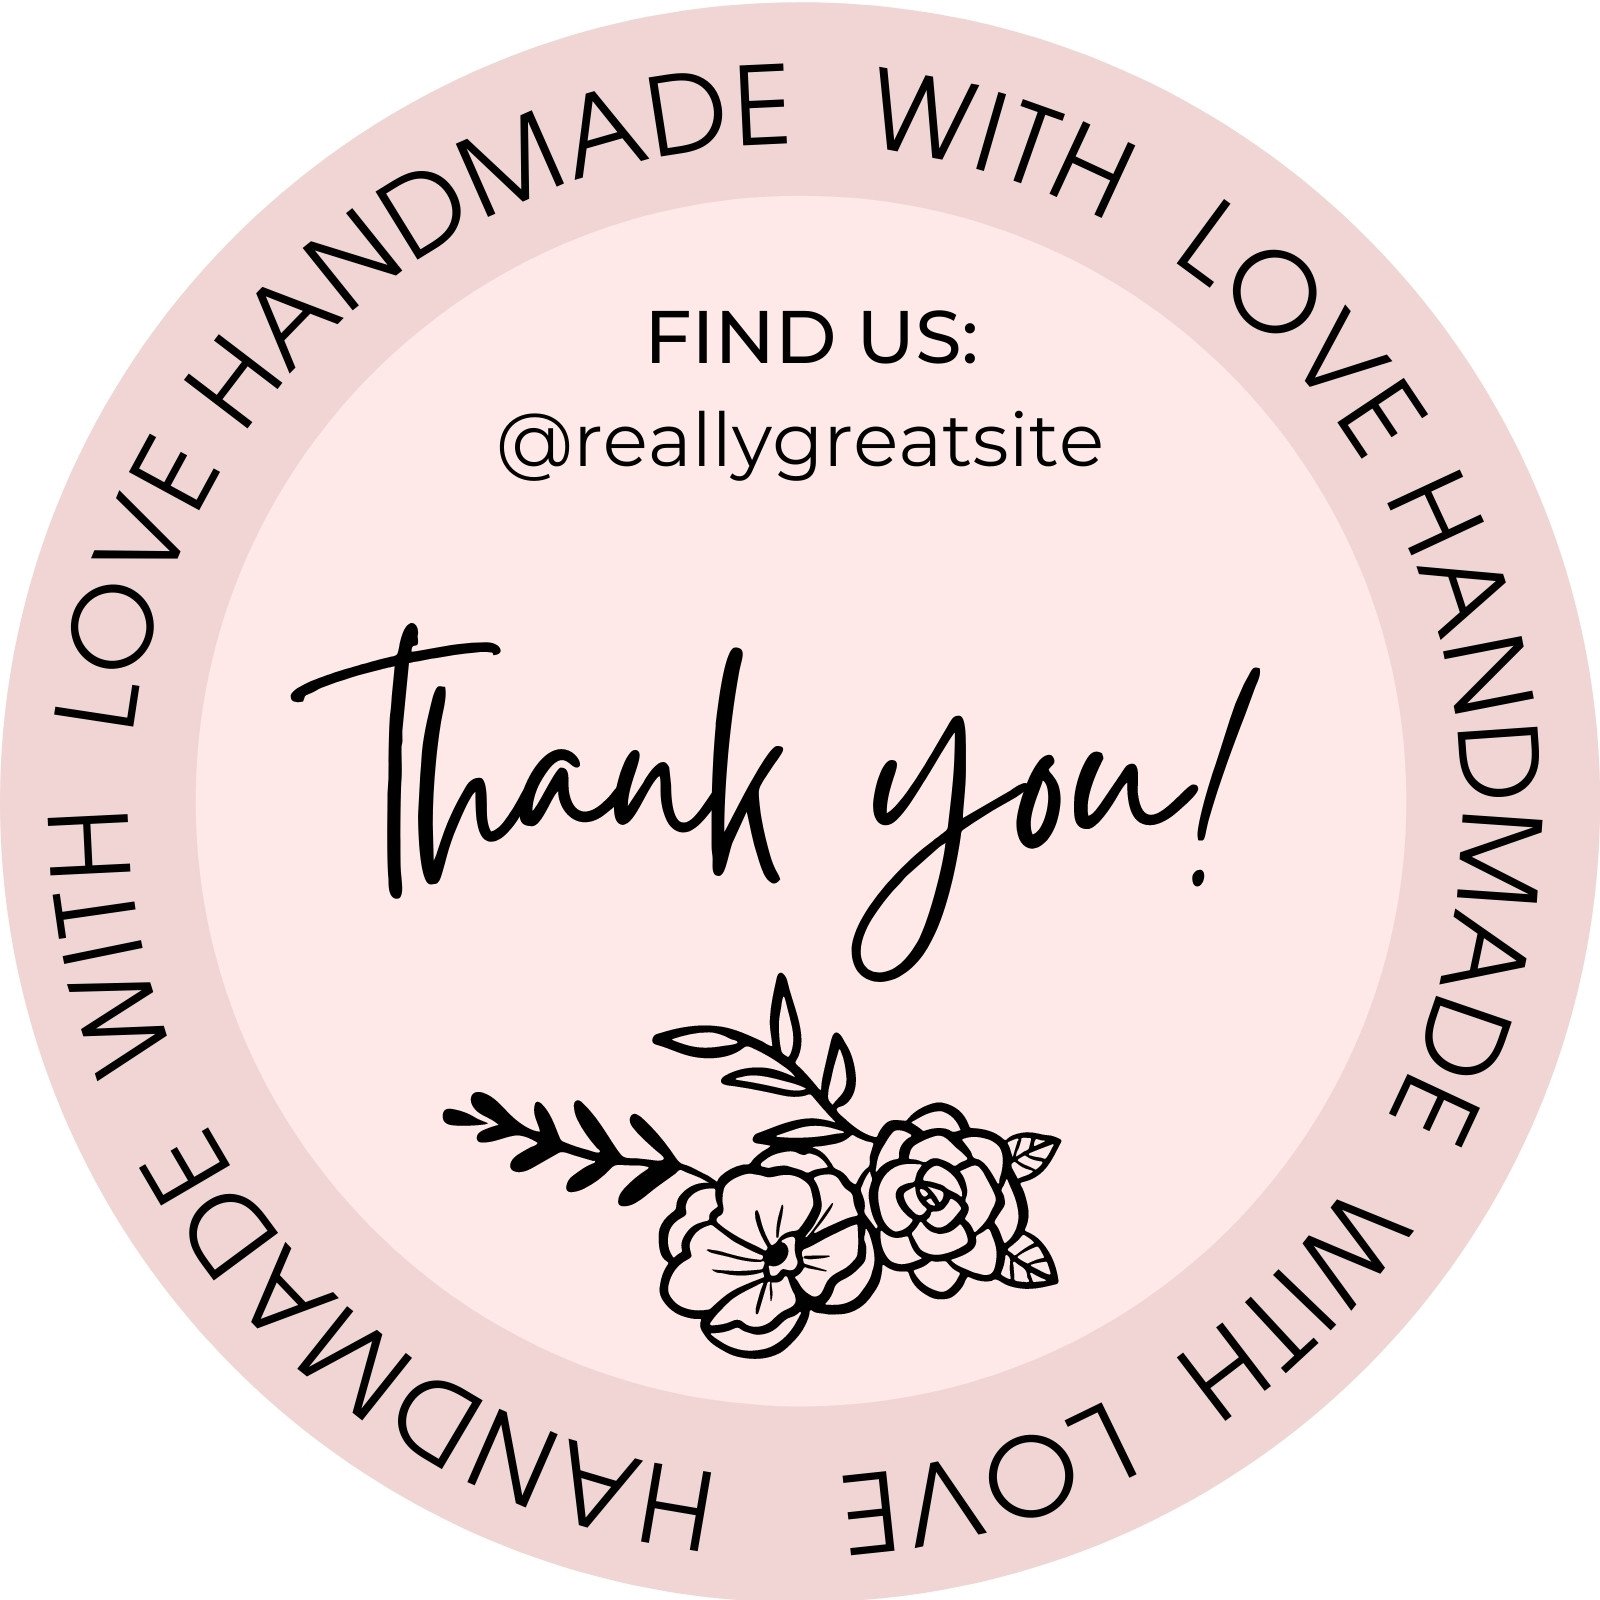 https://marketplace.canva.com/EAFAChbuZQg/2/0/1600w/canva-pink-thank-you-sticker-for-small-business%2C-handmade-with-love-OeWhNsSOnXU.jpg